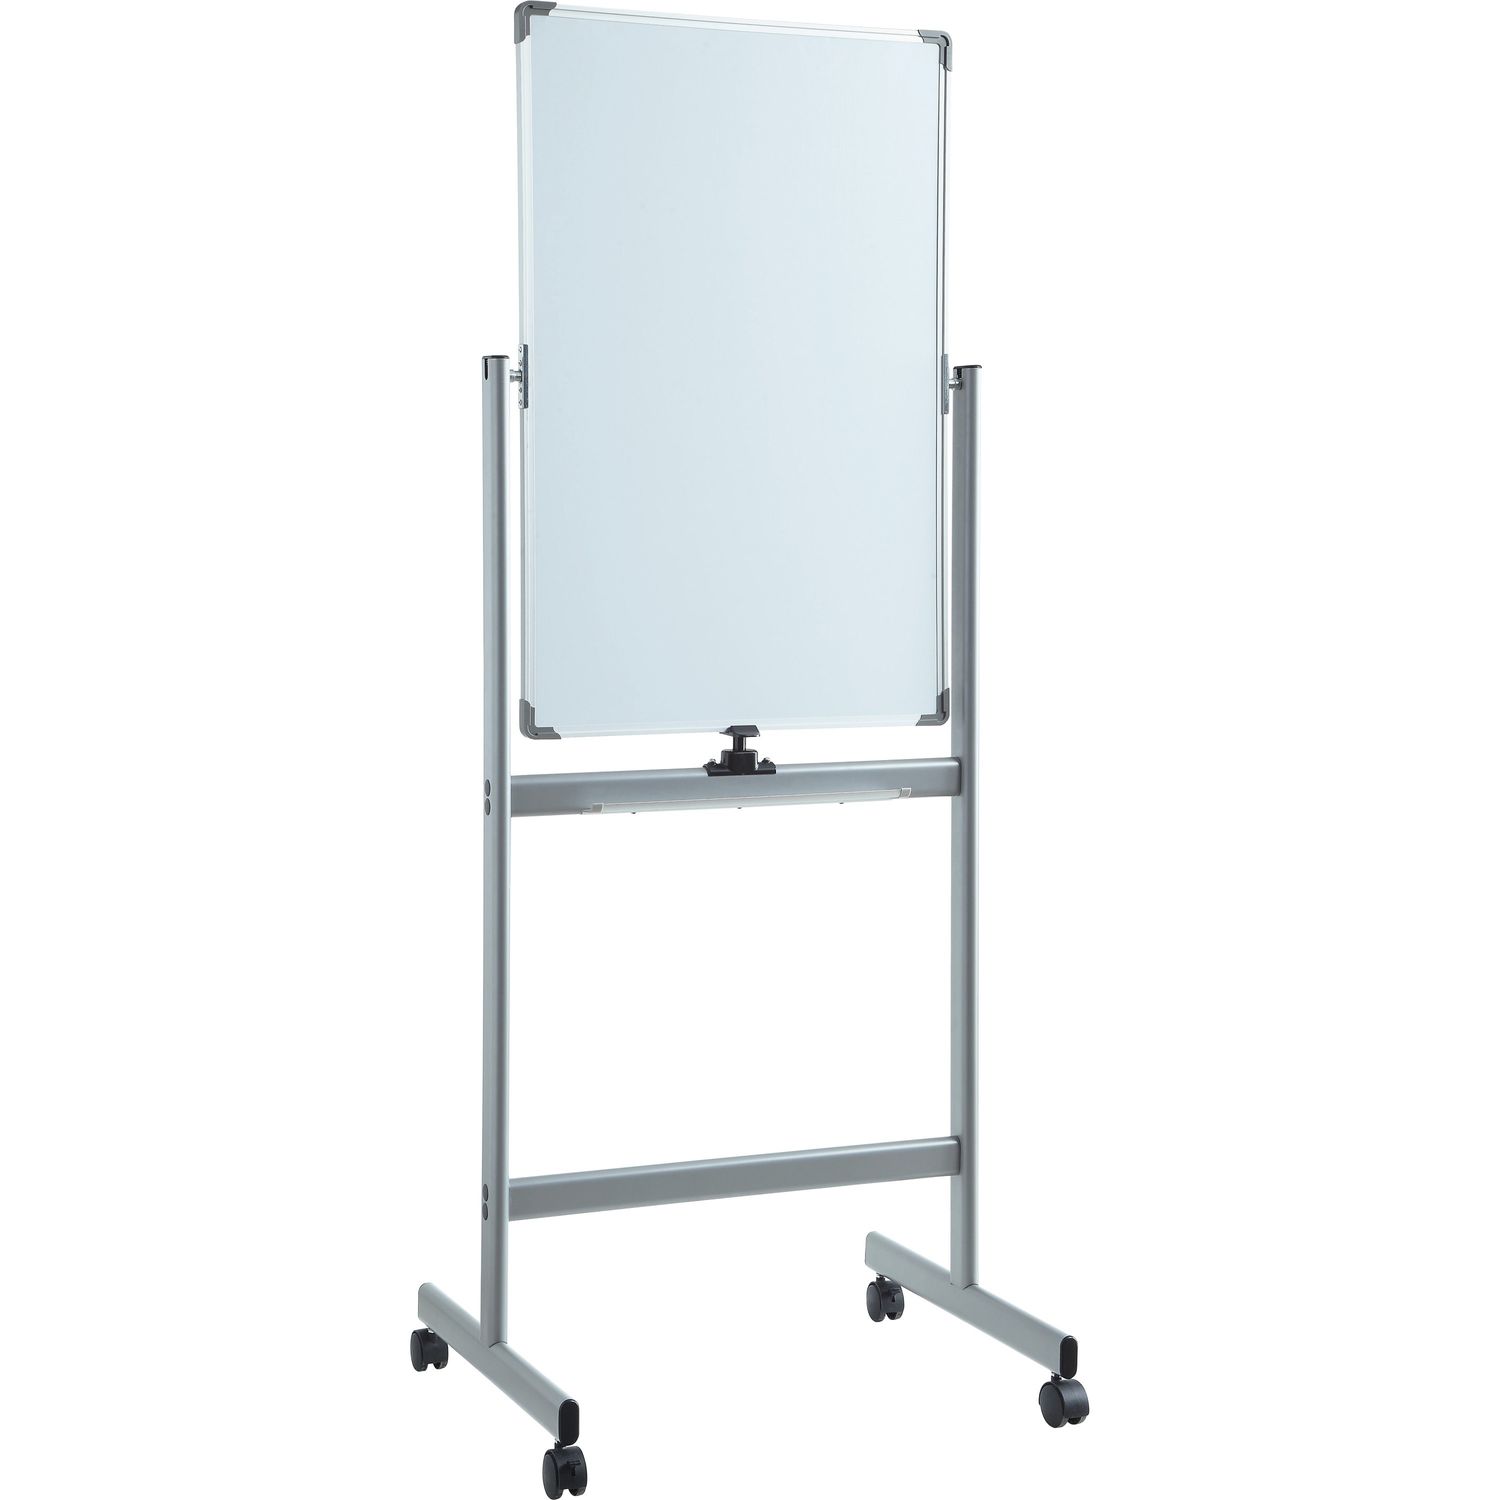 Vertical Magnetic Whiteboard Easel 24" (2 ft) Width x 36" (3 ft) Height, White Surface, Square, Vertical, Floor Standing, 1 Each